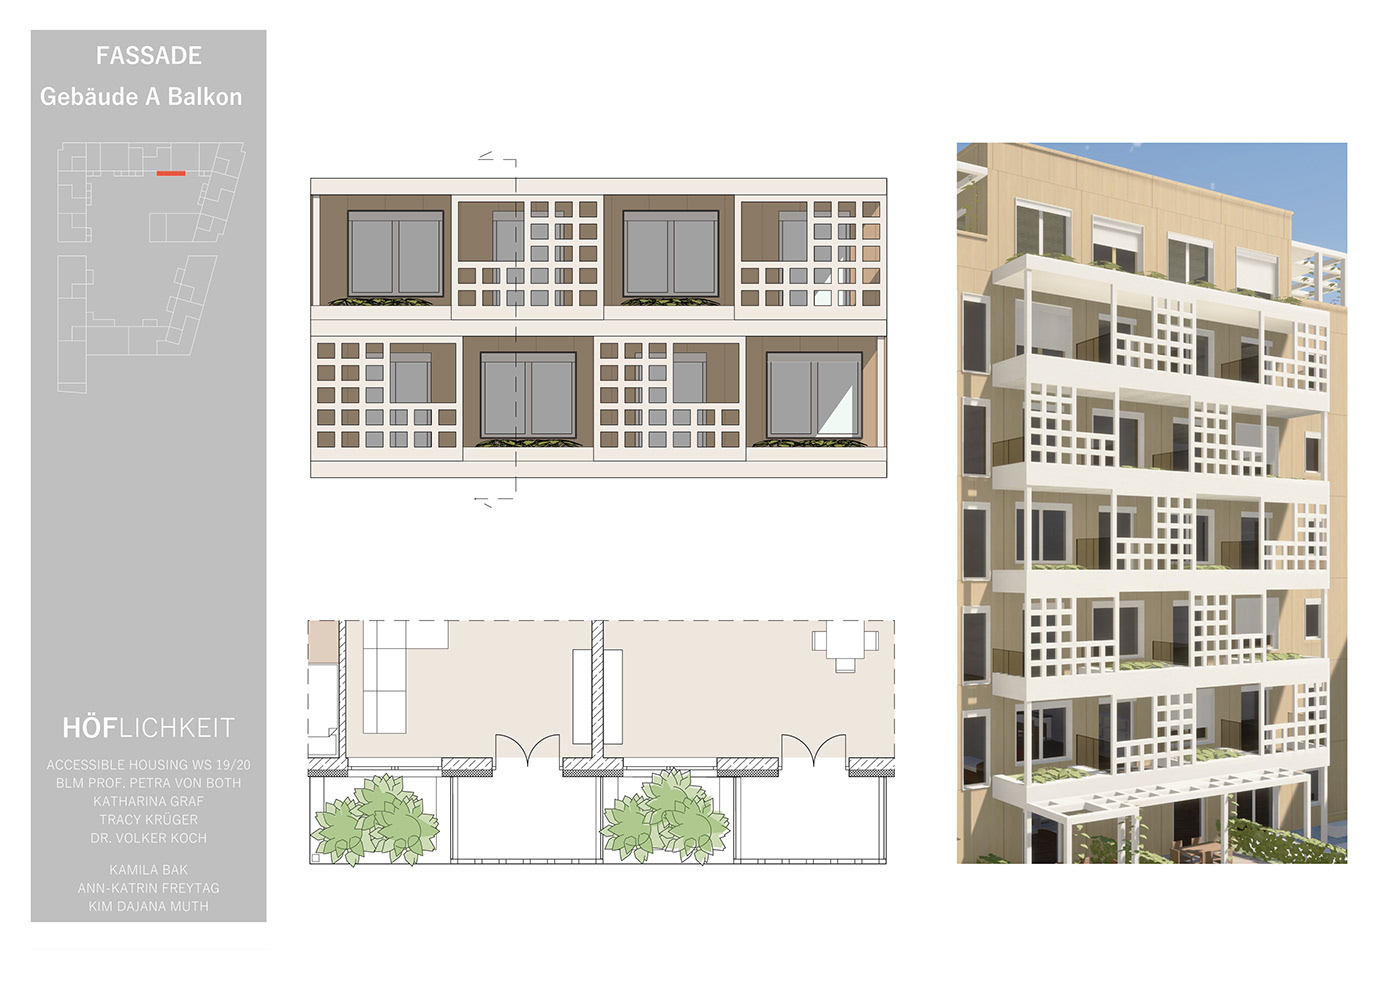 Accessible Housing ArchiCAD architecture bim-based design co-living karlsruhe Master student